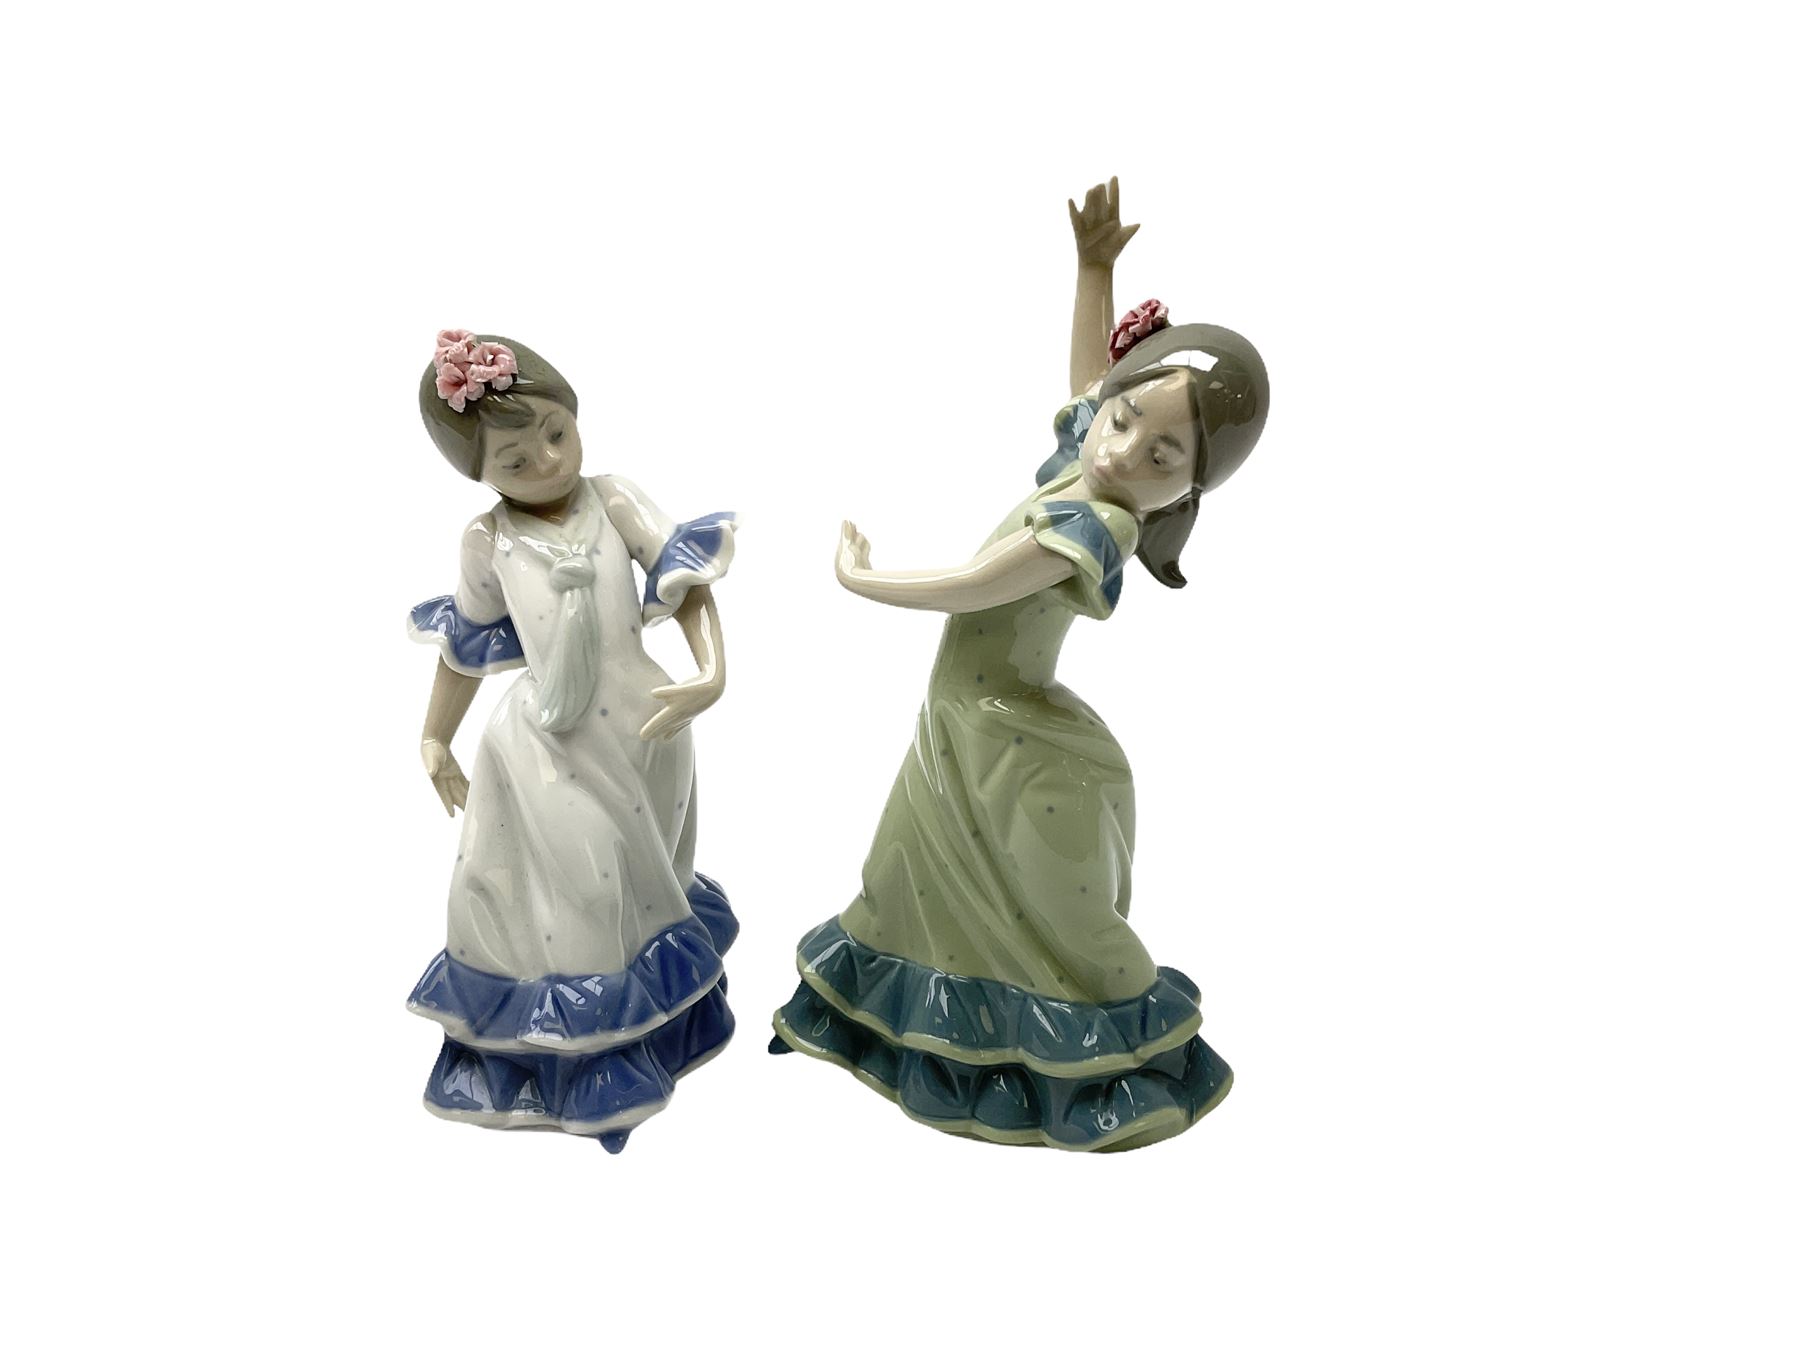 Lladro figure modelled as a female figure playing the flute - Image 7 of 9